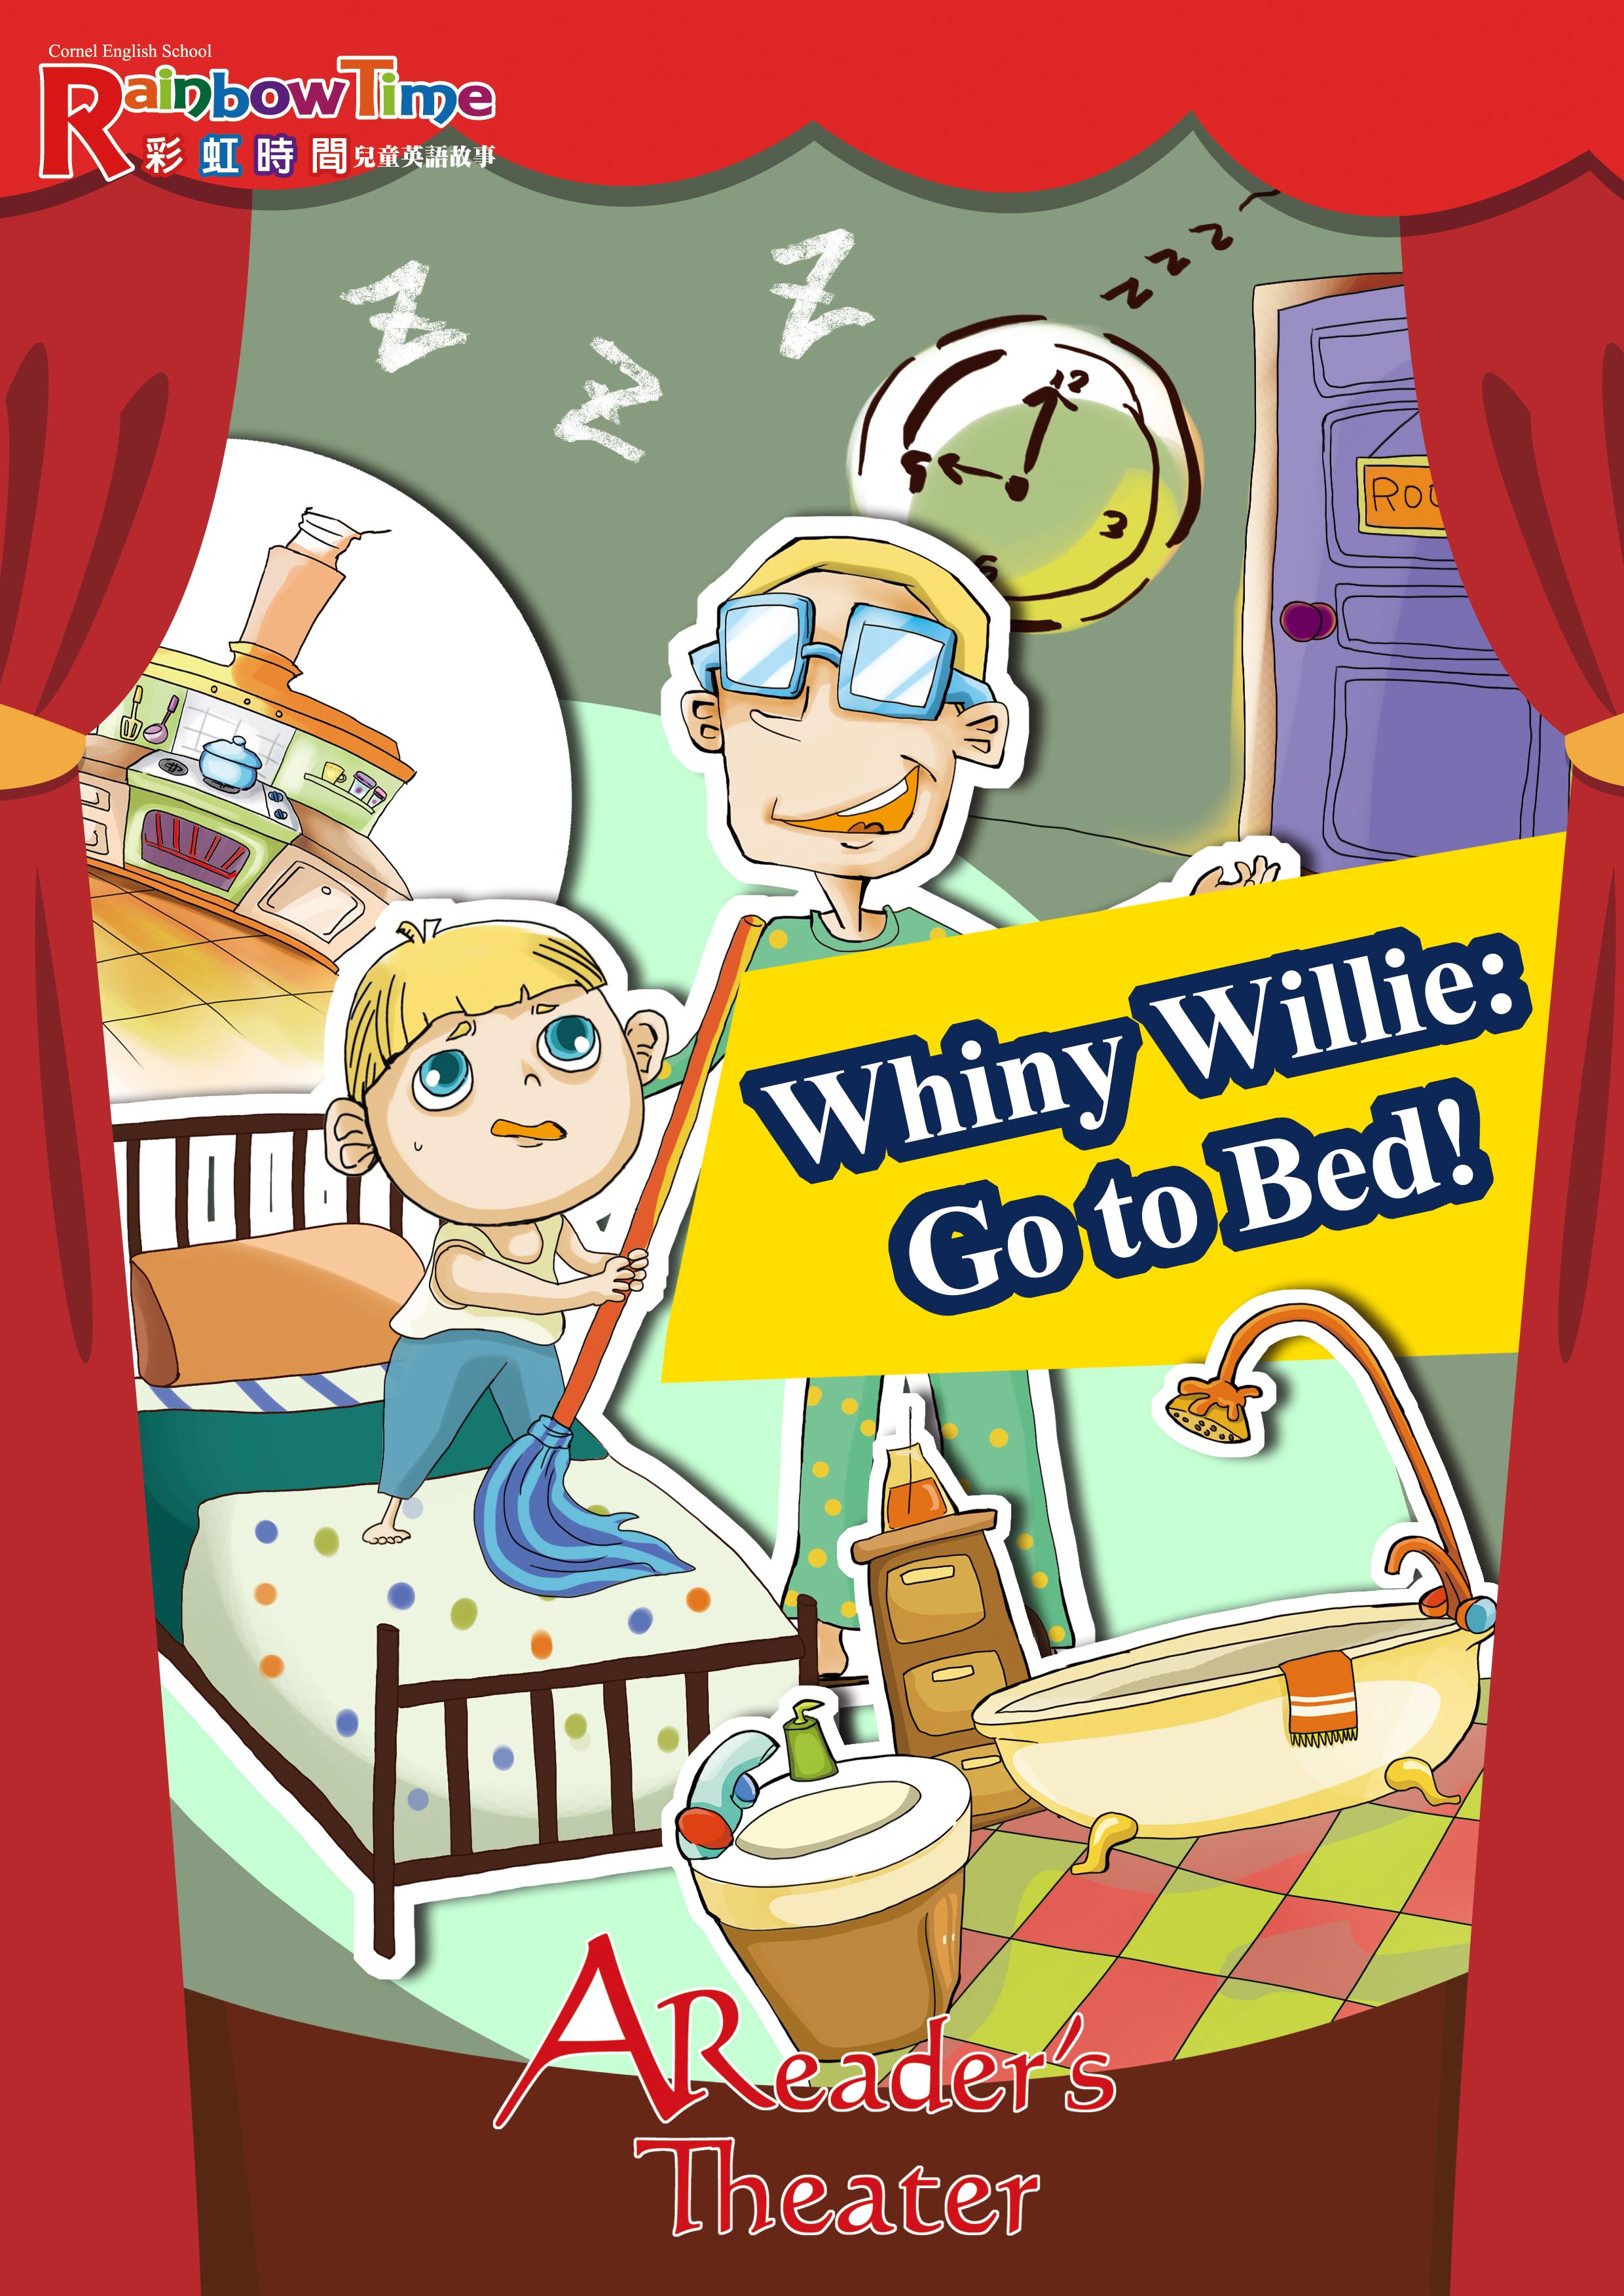 Reader's Theater- Whiny Willie: Go to Bed!